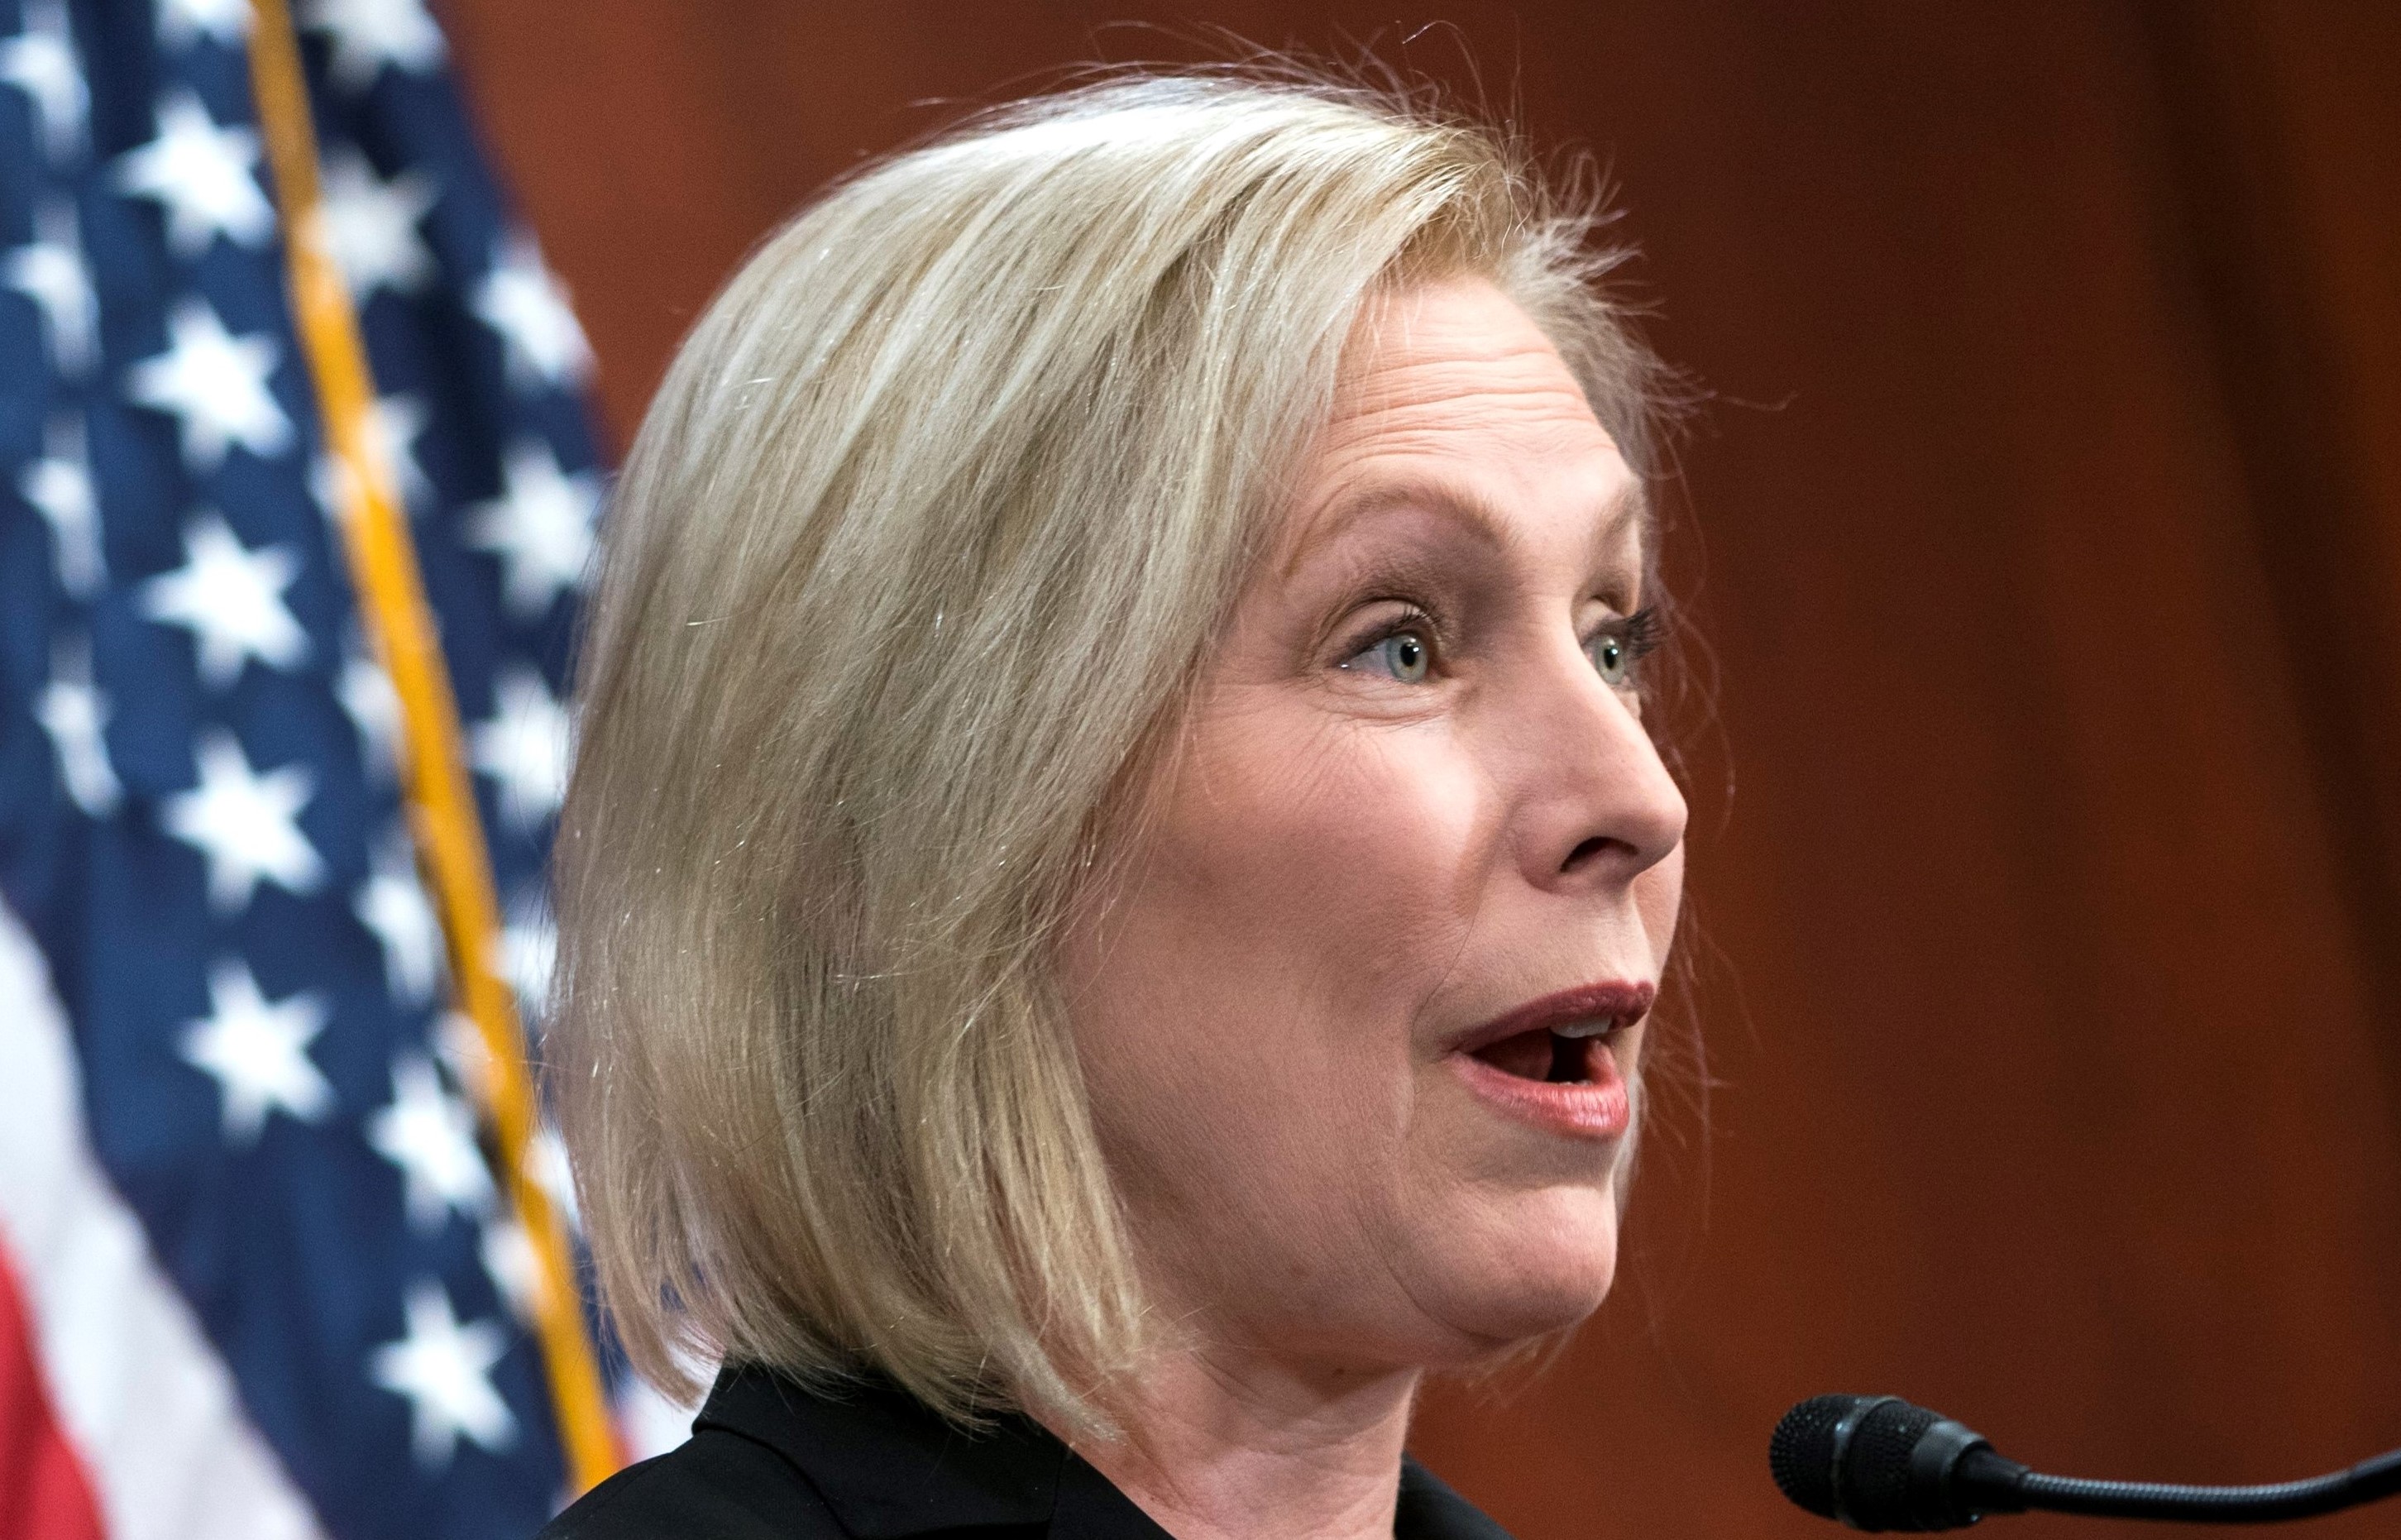 epa06385248 Democratic Senator from New York, Kirsten Gillibrand, speaks about President Trump's sexually suggestive tweet about her in the US Capitol in Washington, DC, USA, 12 December 2017. In response to the President's suggestion that she would 'do anything' for money, Gillibrand said 'you cannot silence me or the millions of women who have gotten off the sidelines to speak out about the unfitness and shame you have brought to the Oval Office.'  EPA/JIM LO SCALZO